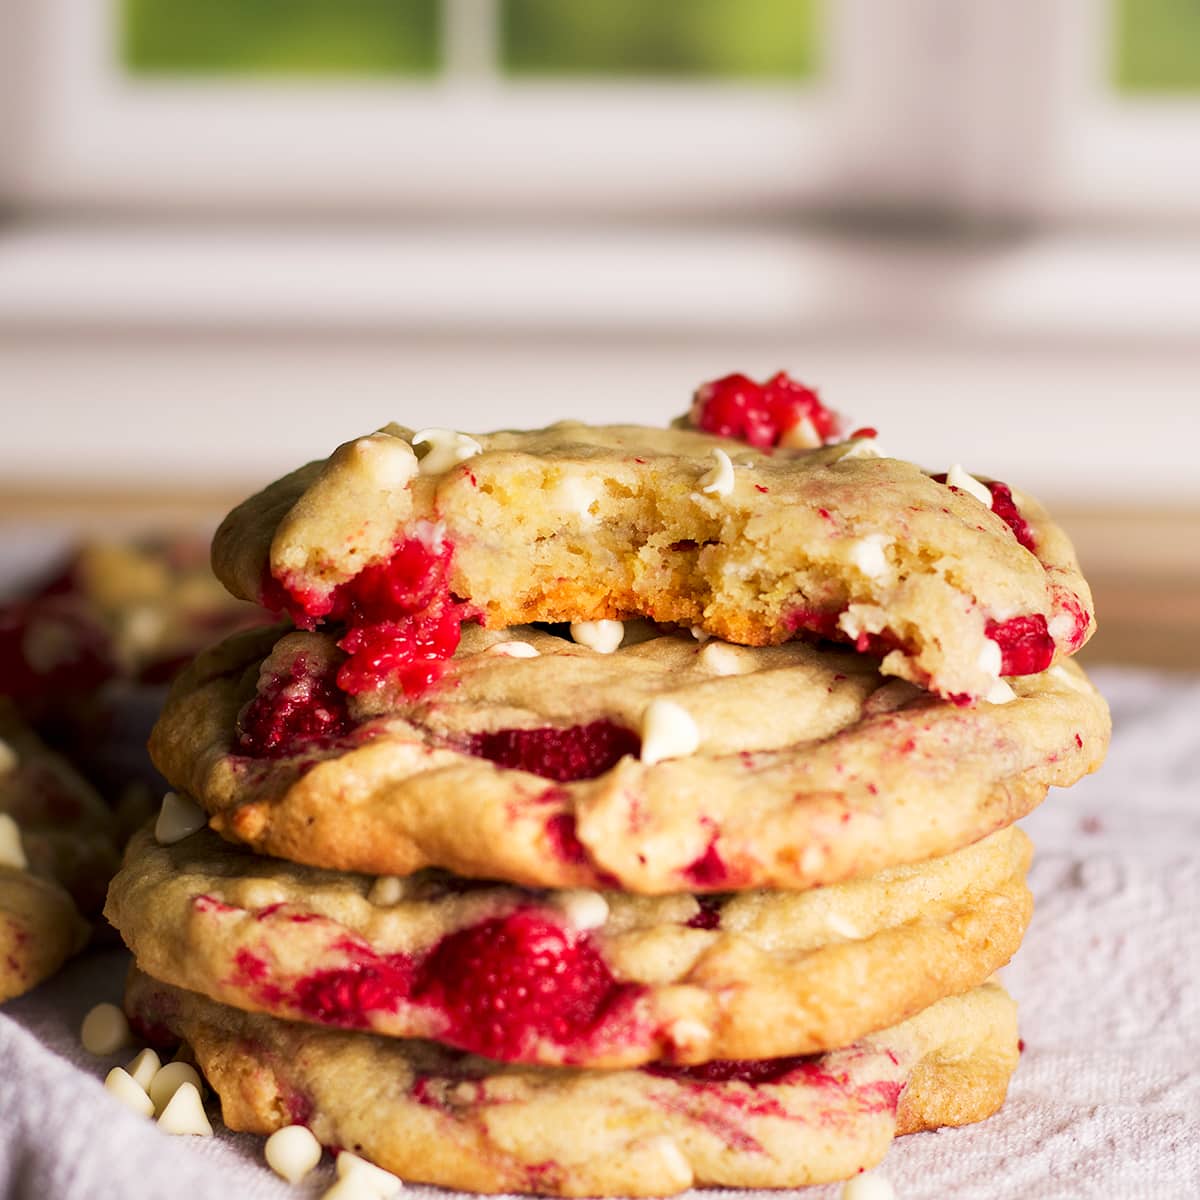 A close up photo of a stack of four white chocolate raspberry cookies. The top cookie has a bite taken out of it so you can see the chewy middle of the cookie.